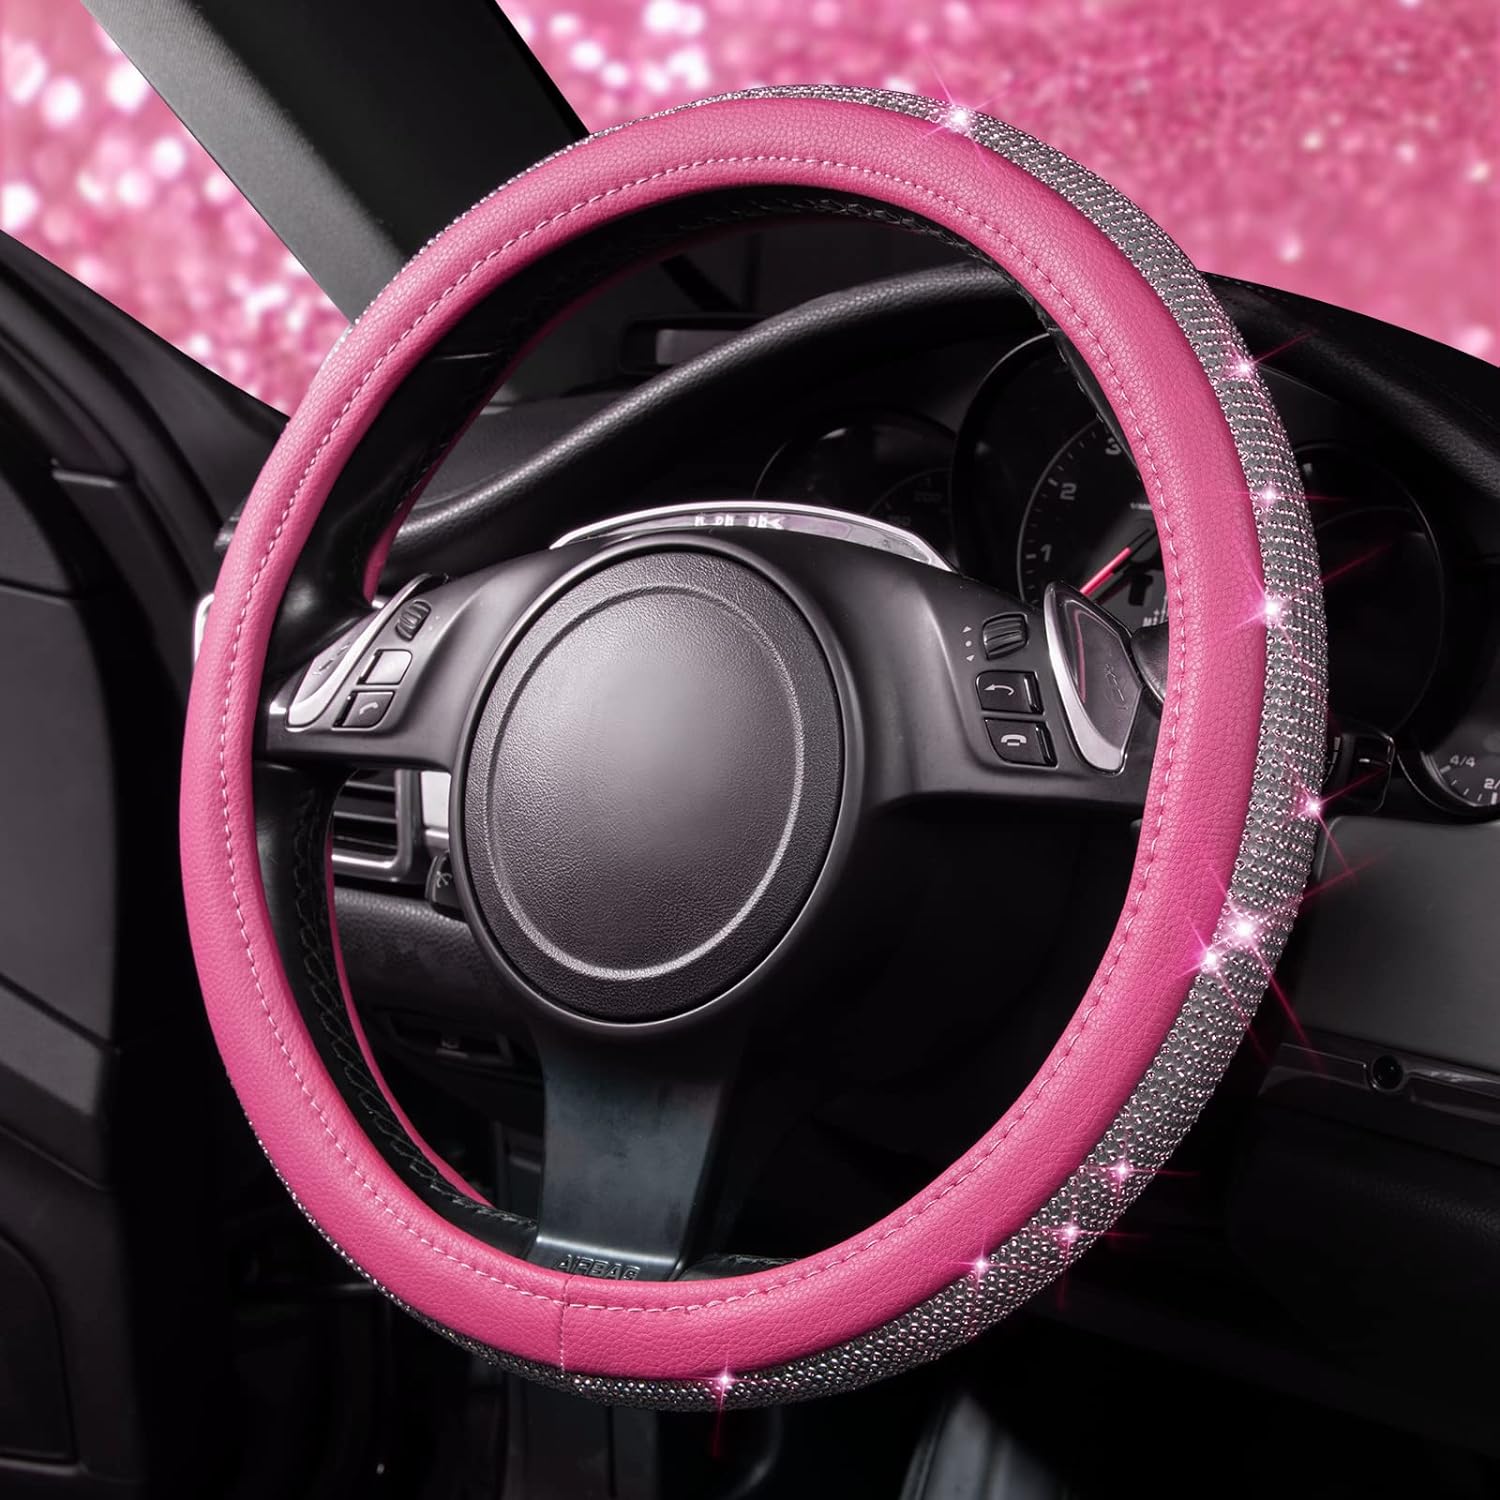 CAR PASS Diamond Car Floor Mats & Pink Leather Steering Wheel Cover, with Bling Crystal Rhinestones Universal Fit 14" 1/2-15" Crystal Glitter, Anti-Slip PVC Heel Pad for Women Sparkle Girl, Pink Diam